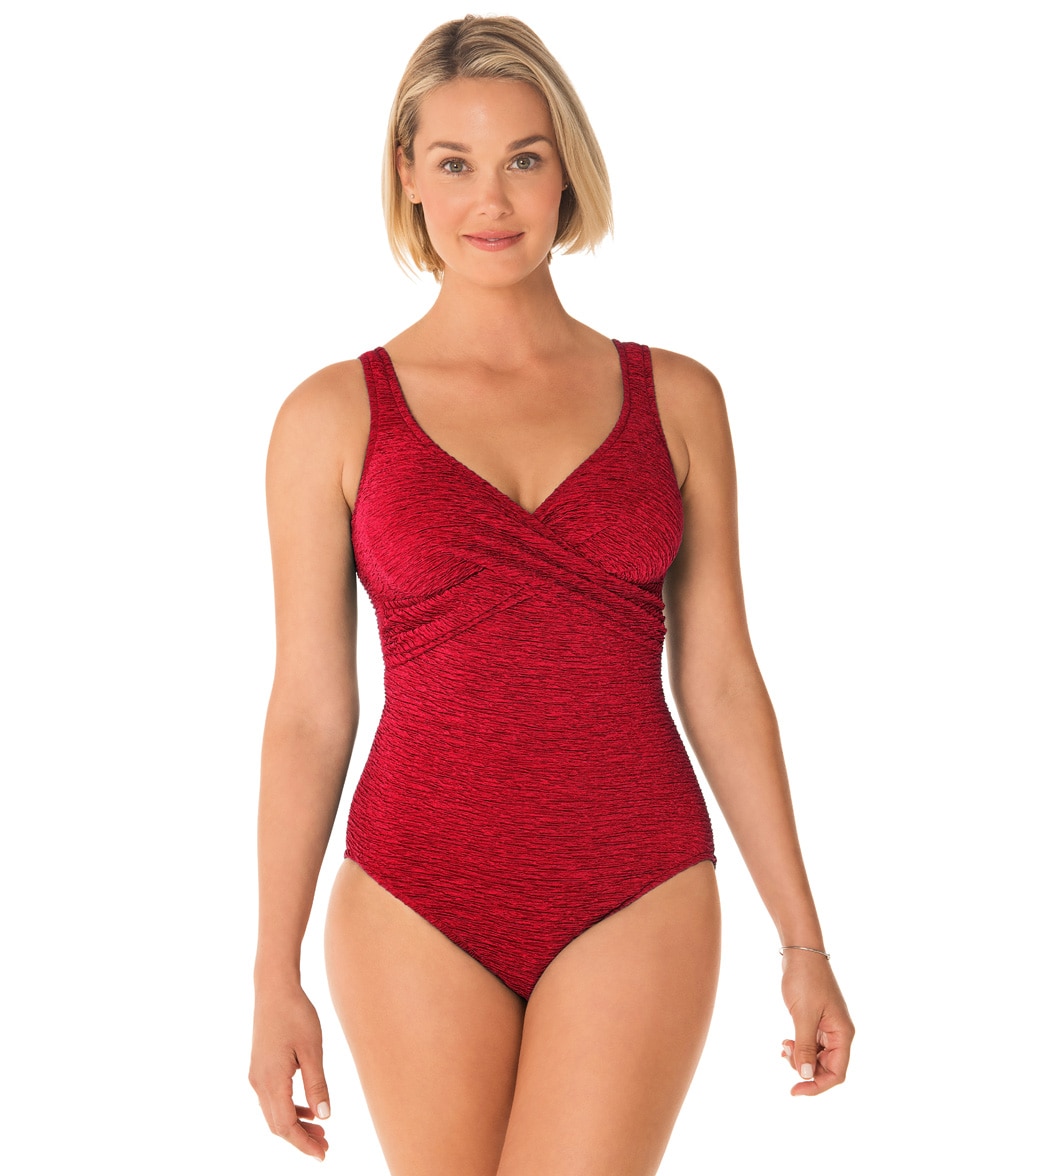 Penbrooke Krinkle Chlorine Resistant Cross Over One Piece Swimsuit - Red 16 Polyester - Swimoutlet.com